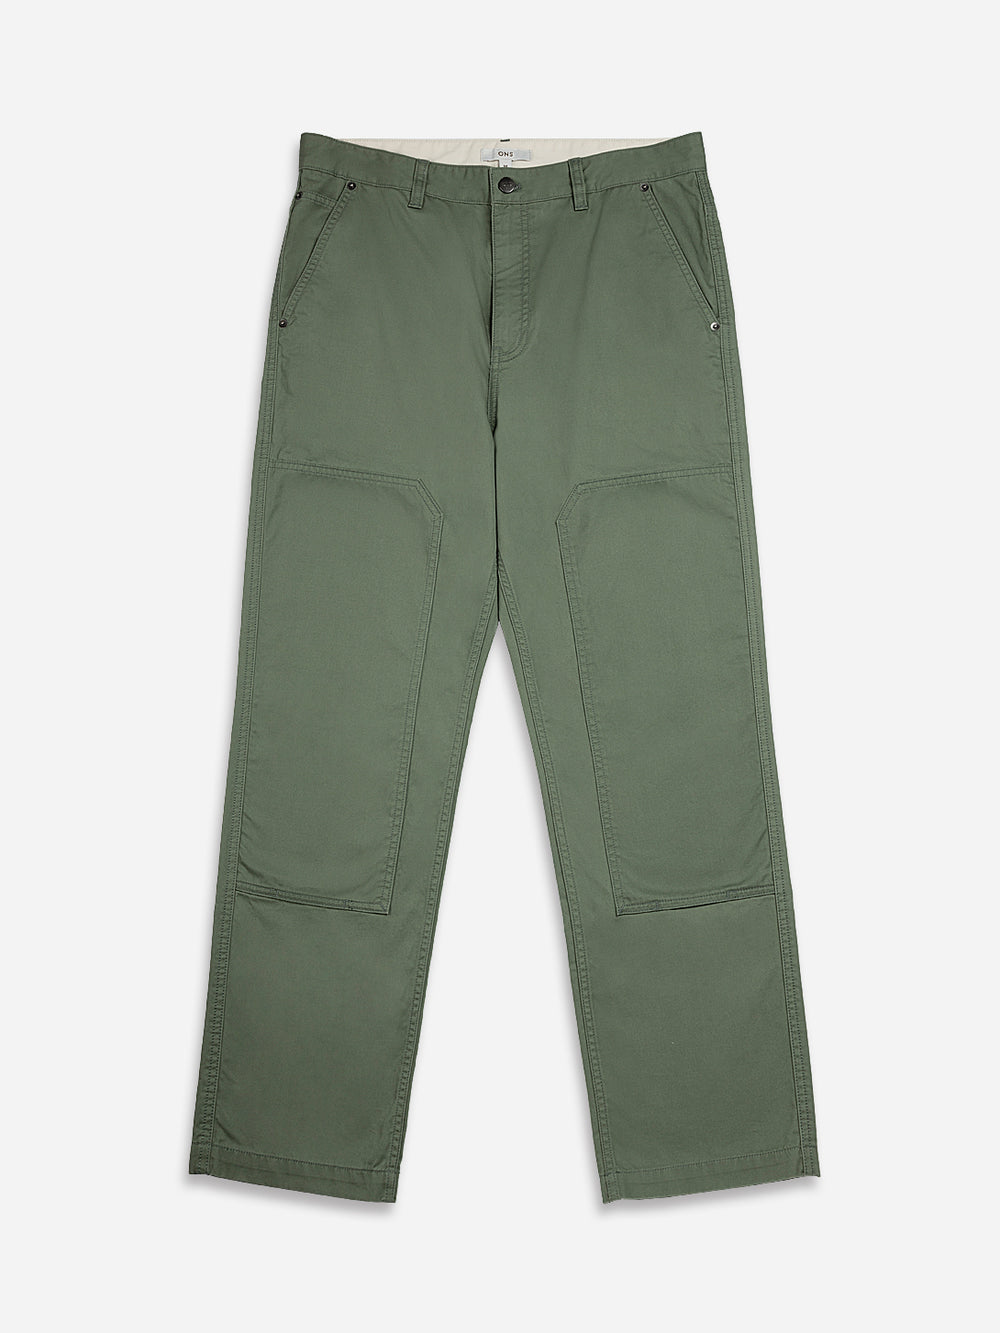 Buy Men's Cotton Flat Front Casual Pant - Dickies Online at Best price - NY